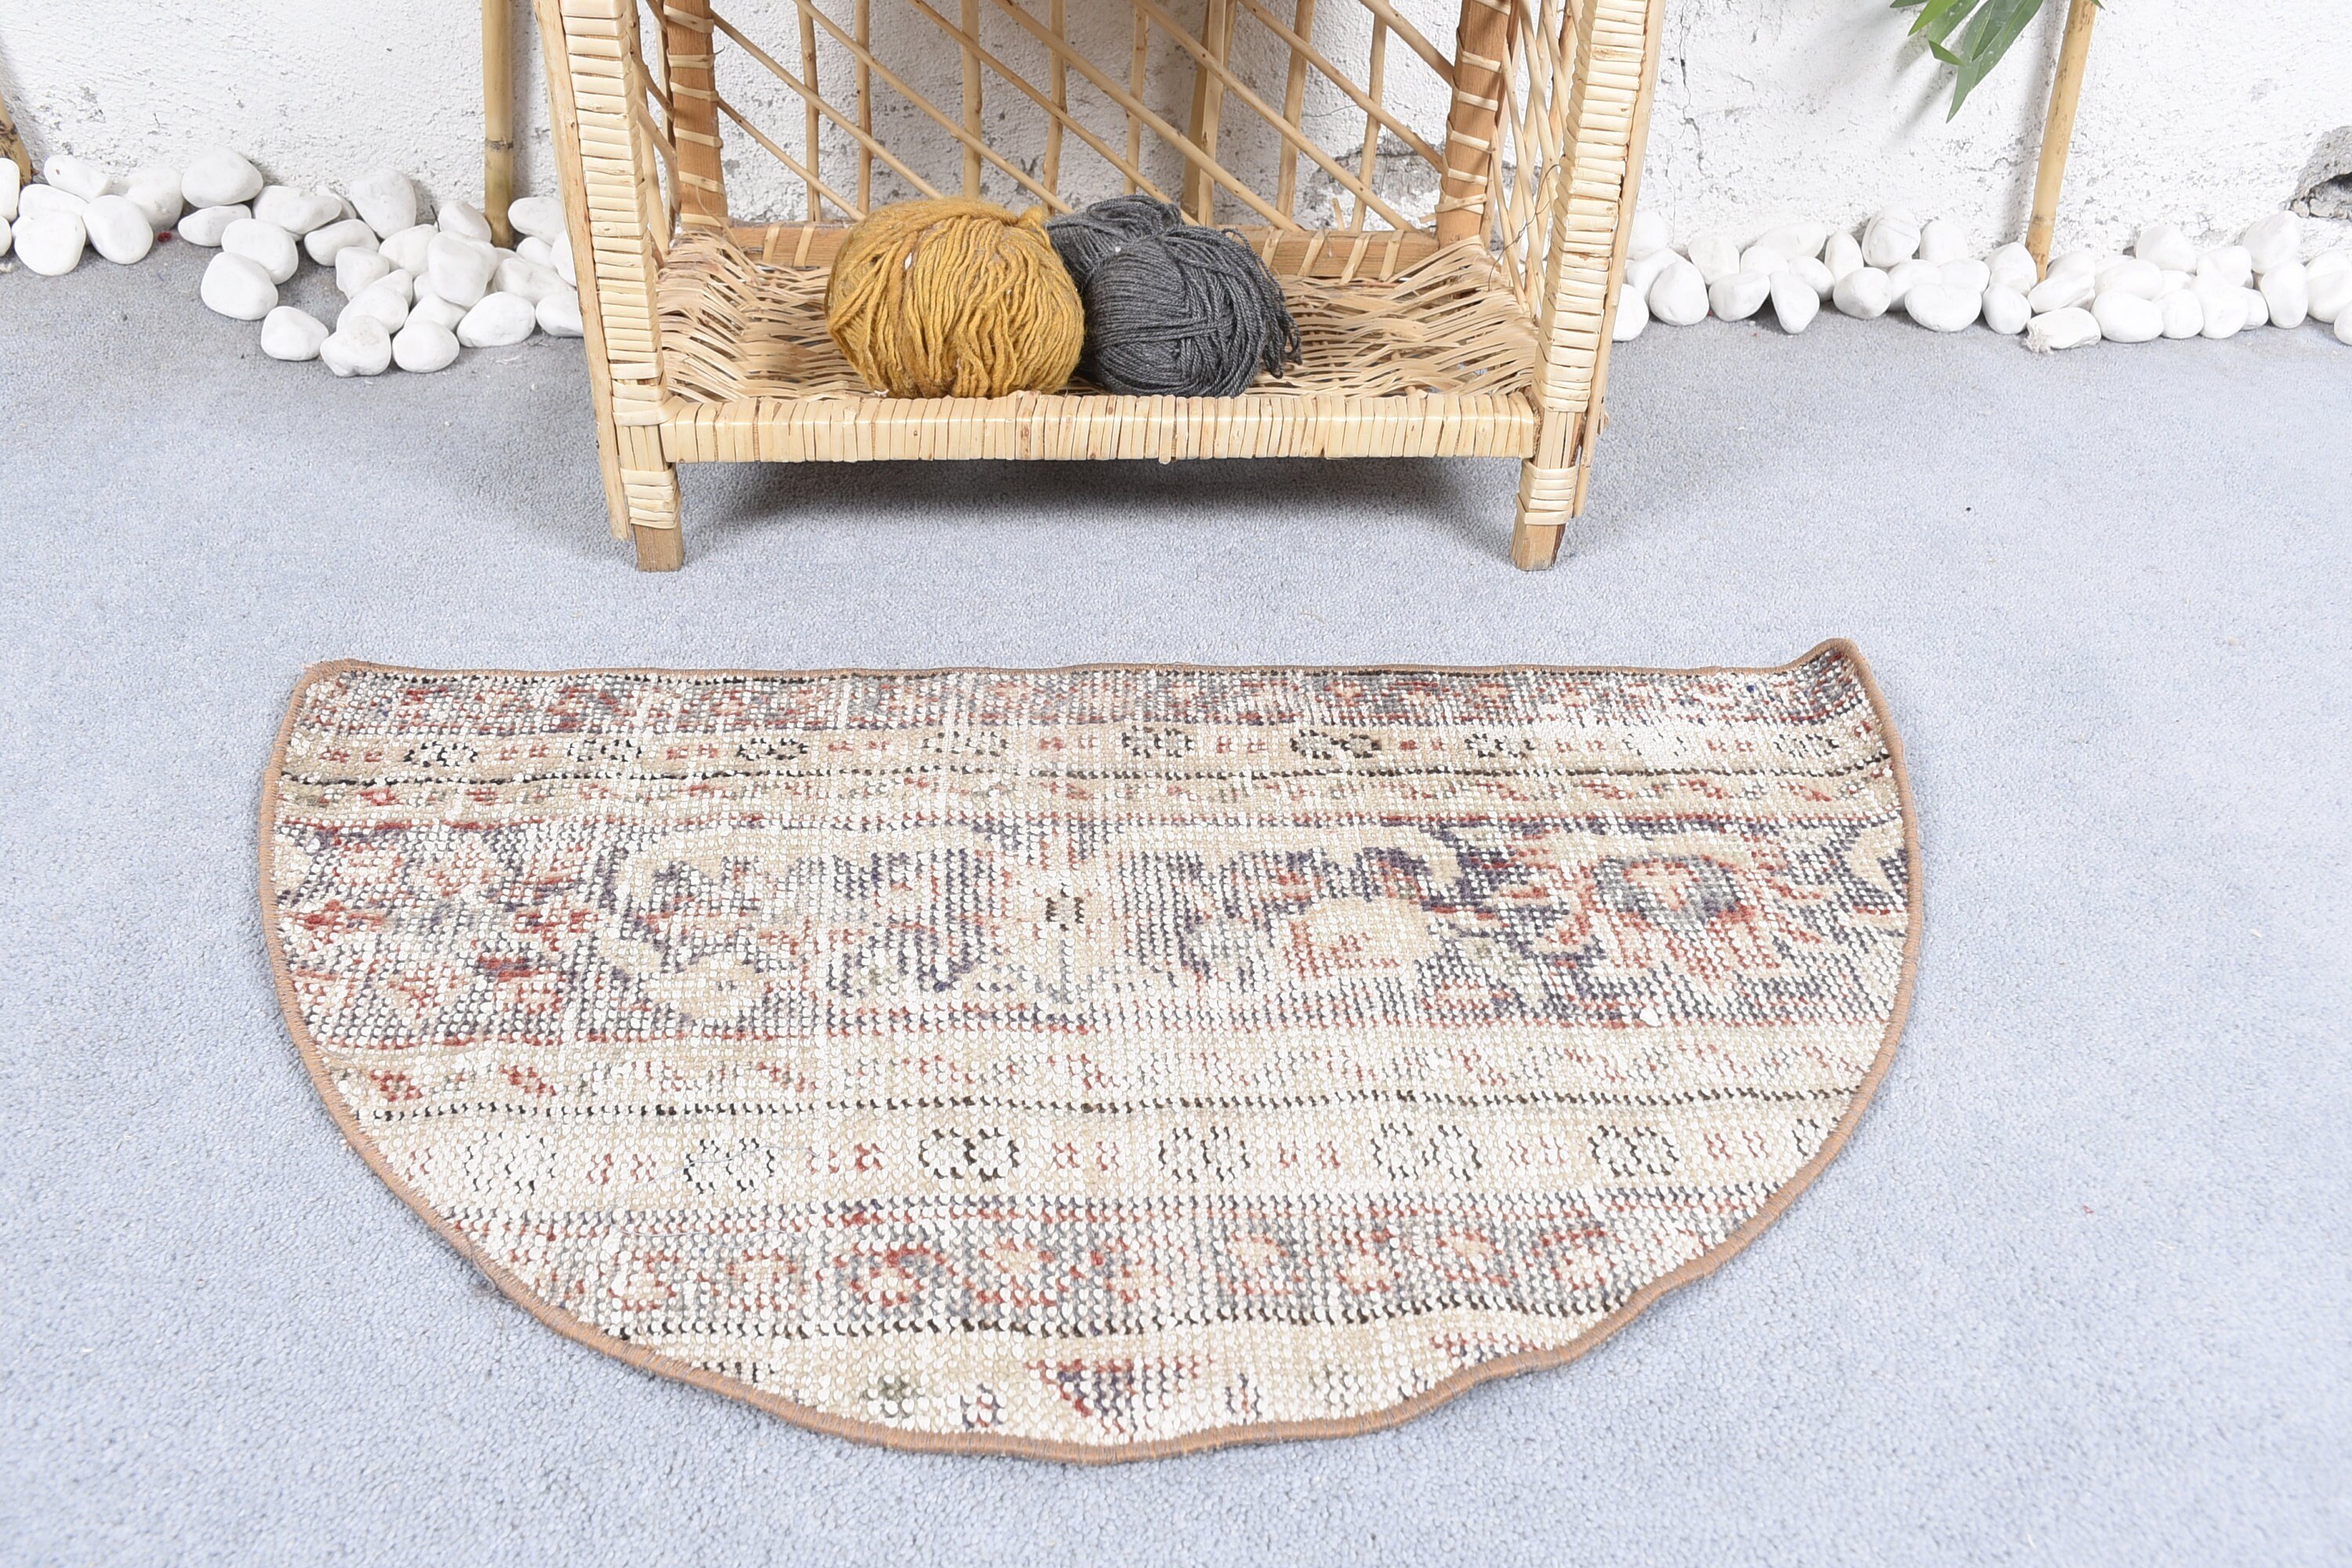 Home Decor Rug, Rugs for Wall Hanging, Kitchen Rug, Bedroom Rug, 2.5x1.5 ft Small Rugs, Beige Antique Rug, Turkish Rug, Vintage Rugs